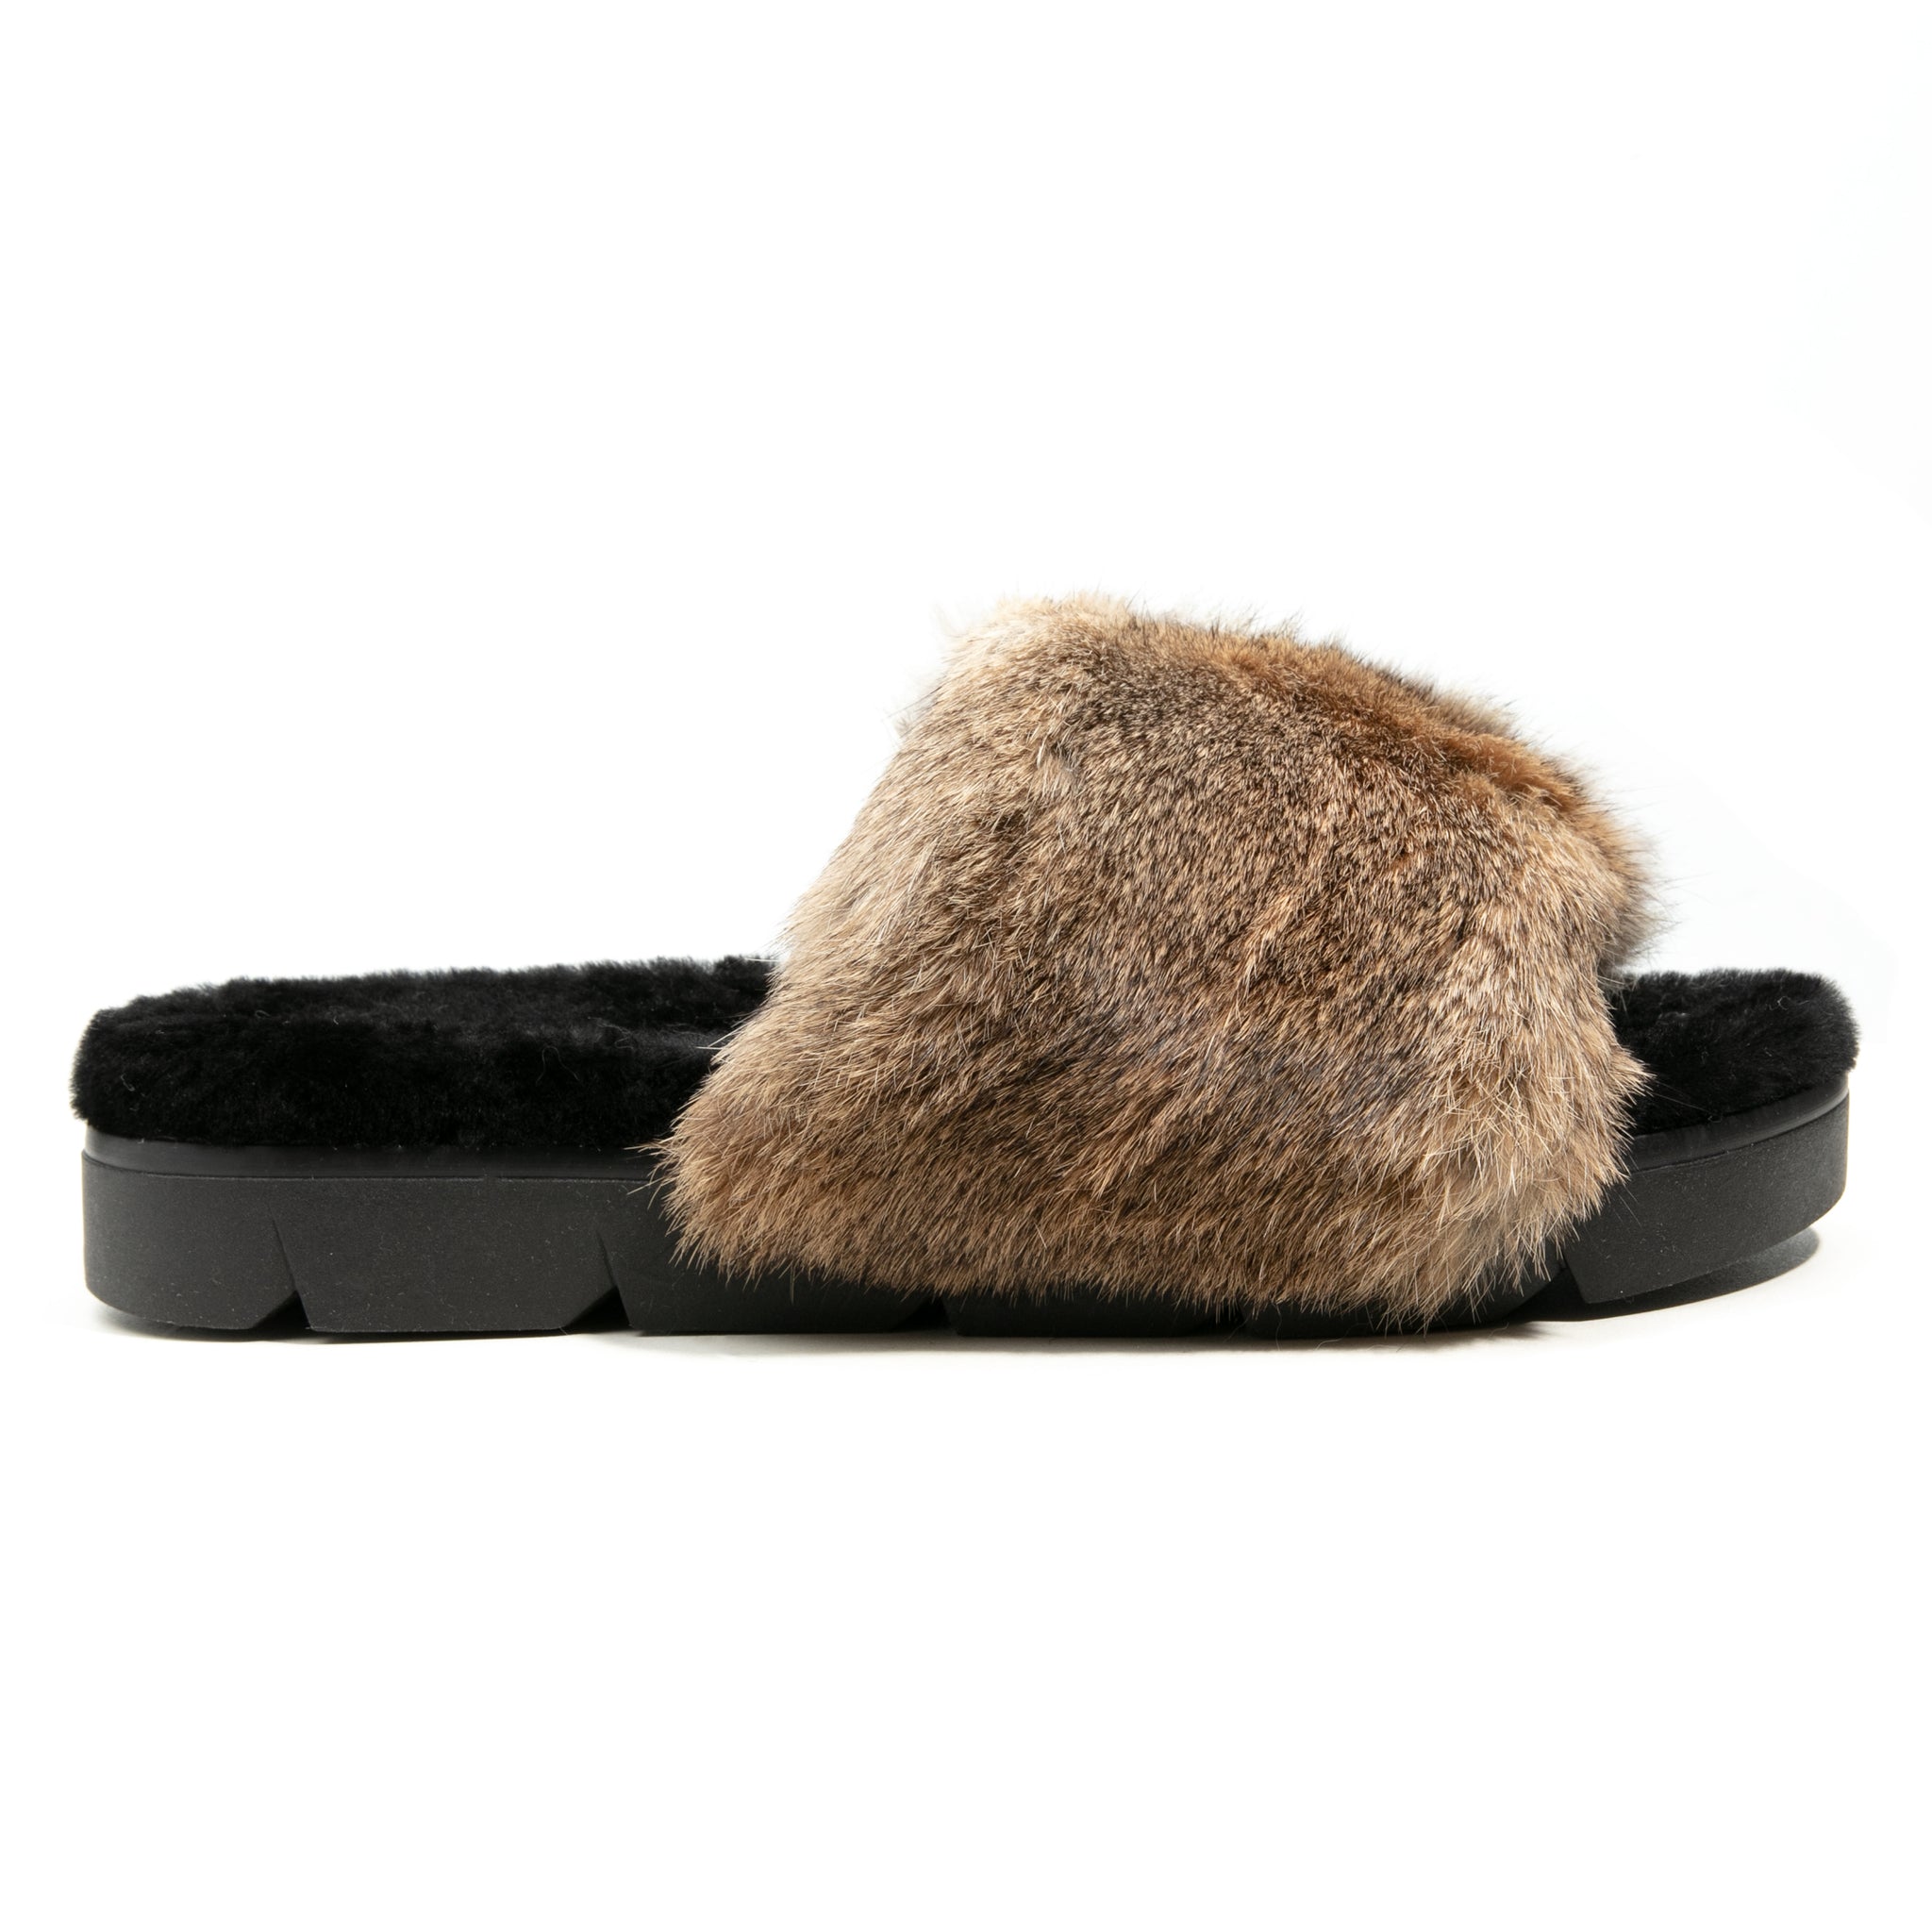 HENRY BEGUELIN Leather Slide with Fur in Renna